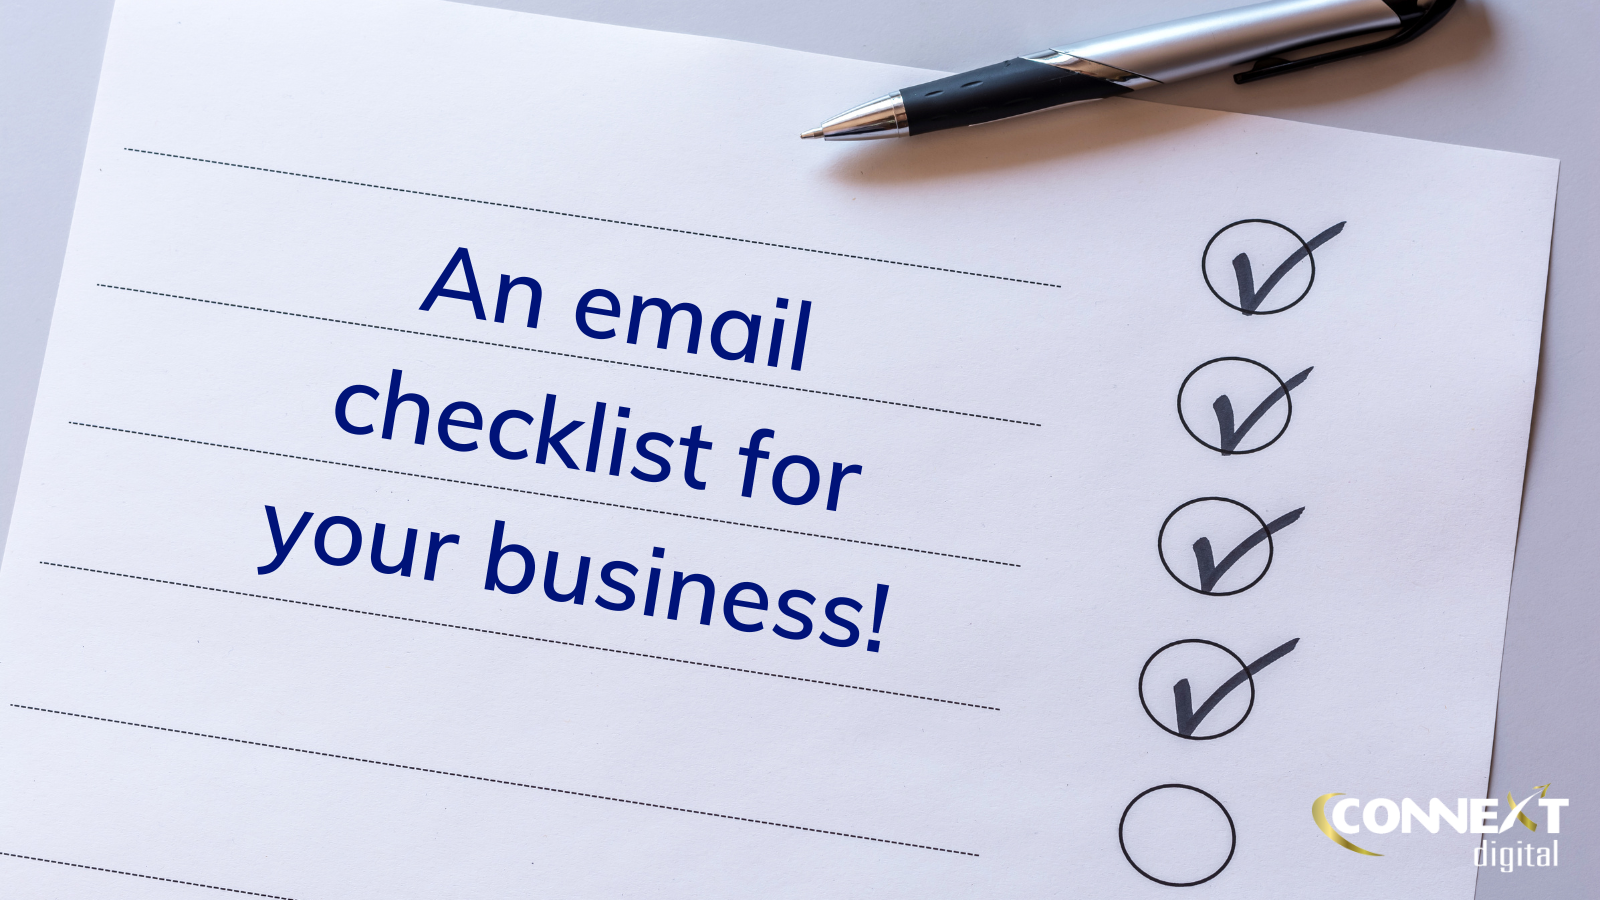 An email checklist for your business! - Connext Digital